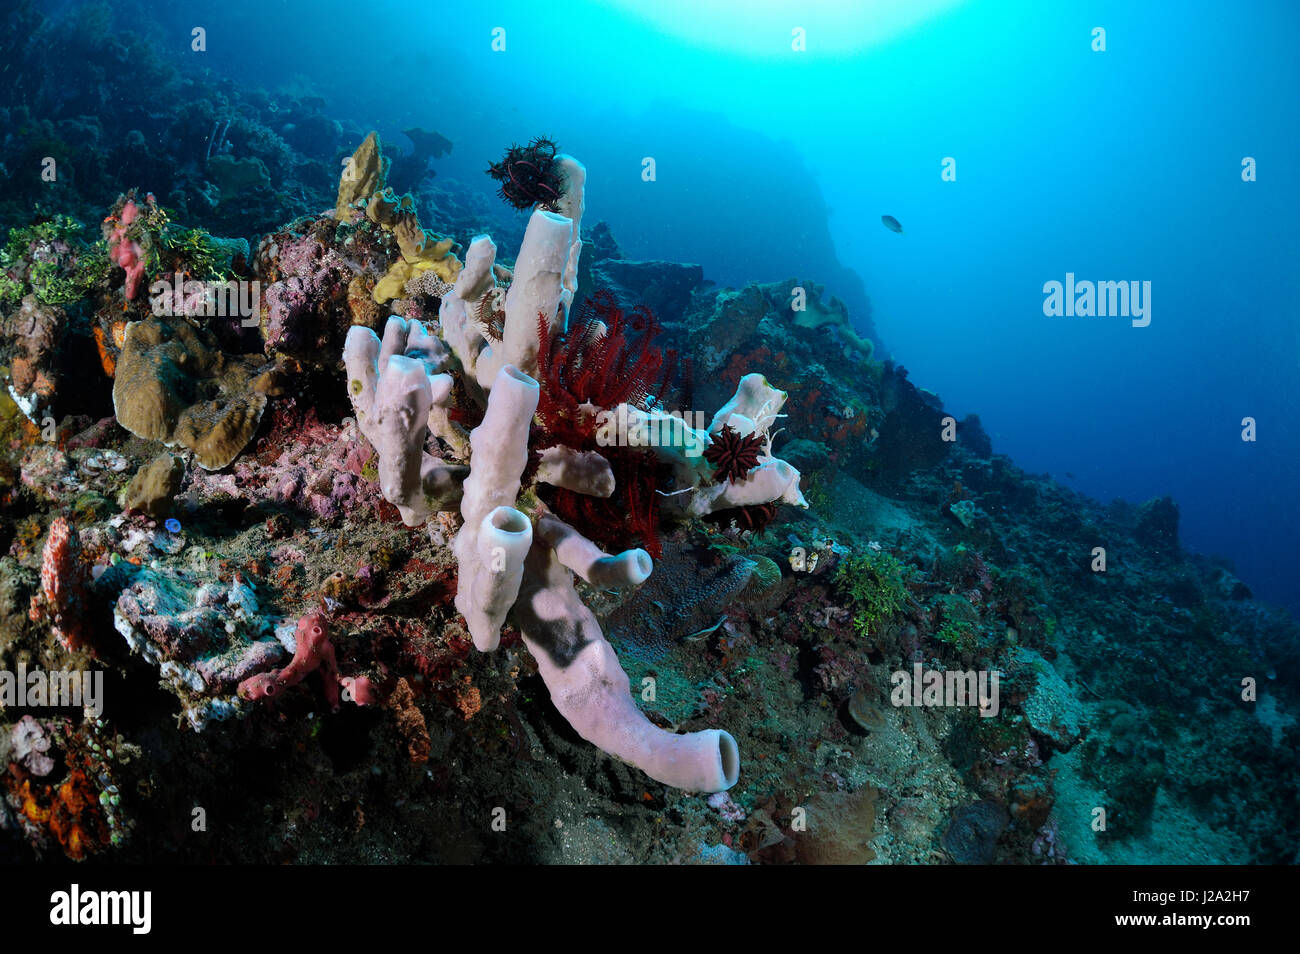 Sponges at the coral reef of the Lembeh strait Stock Photo